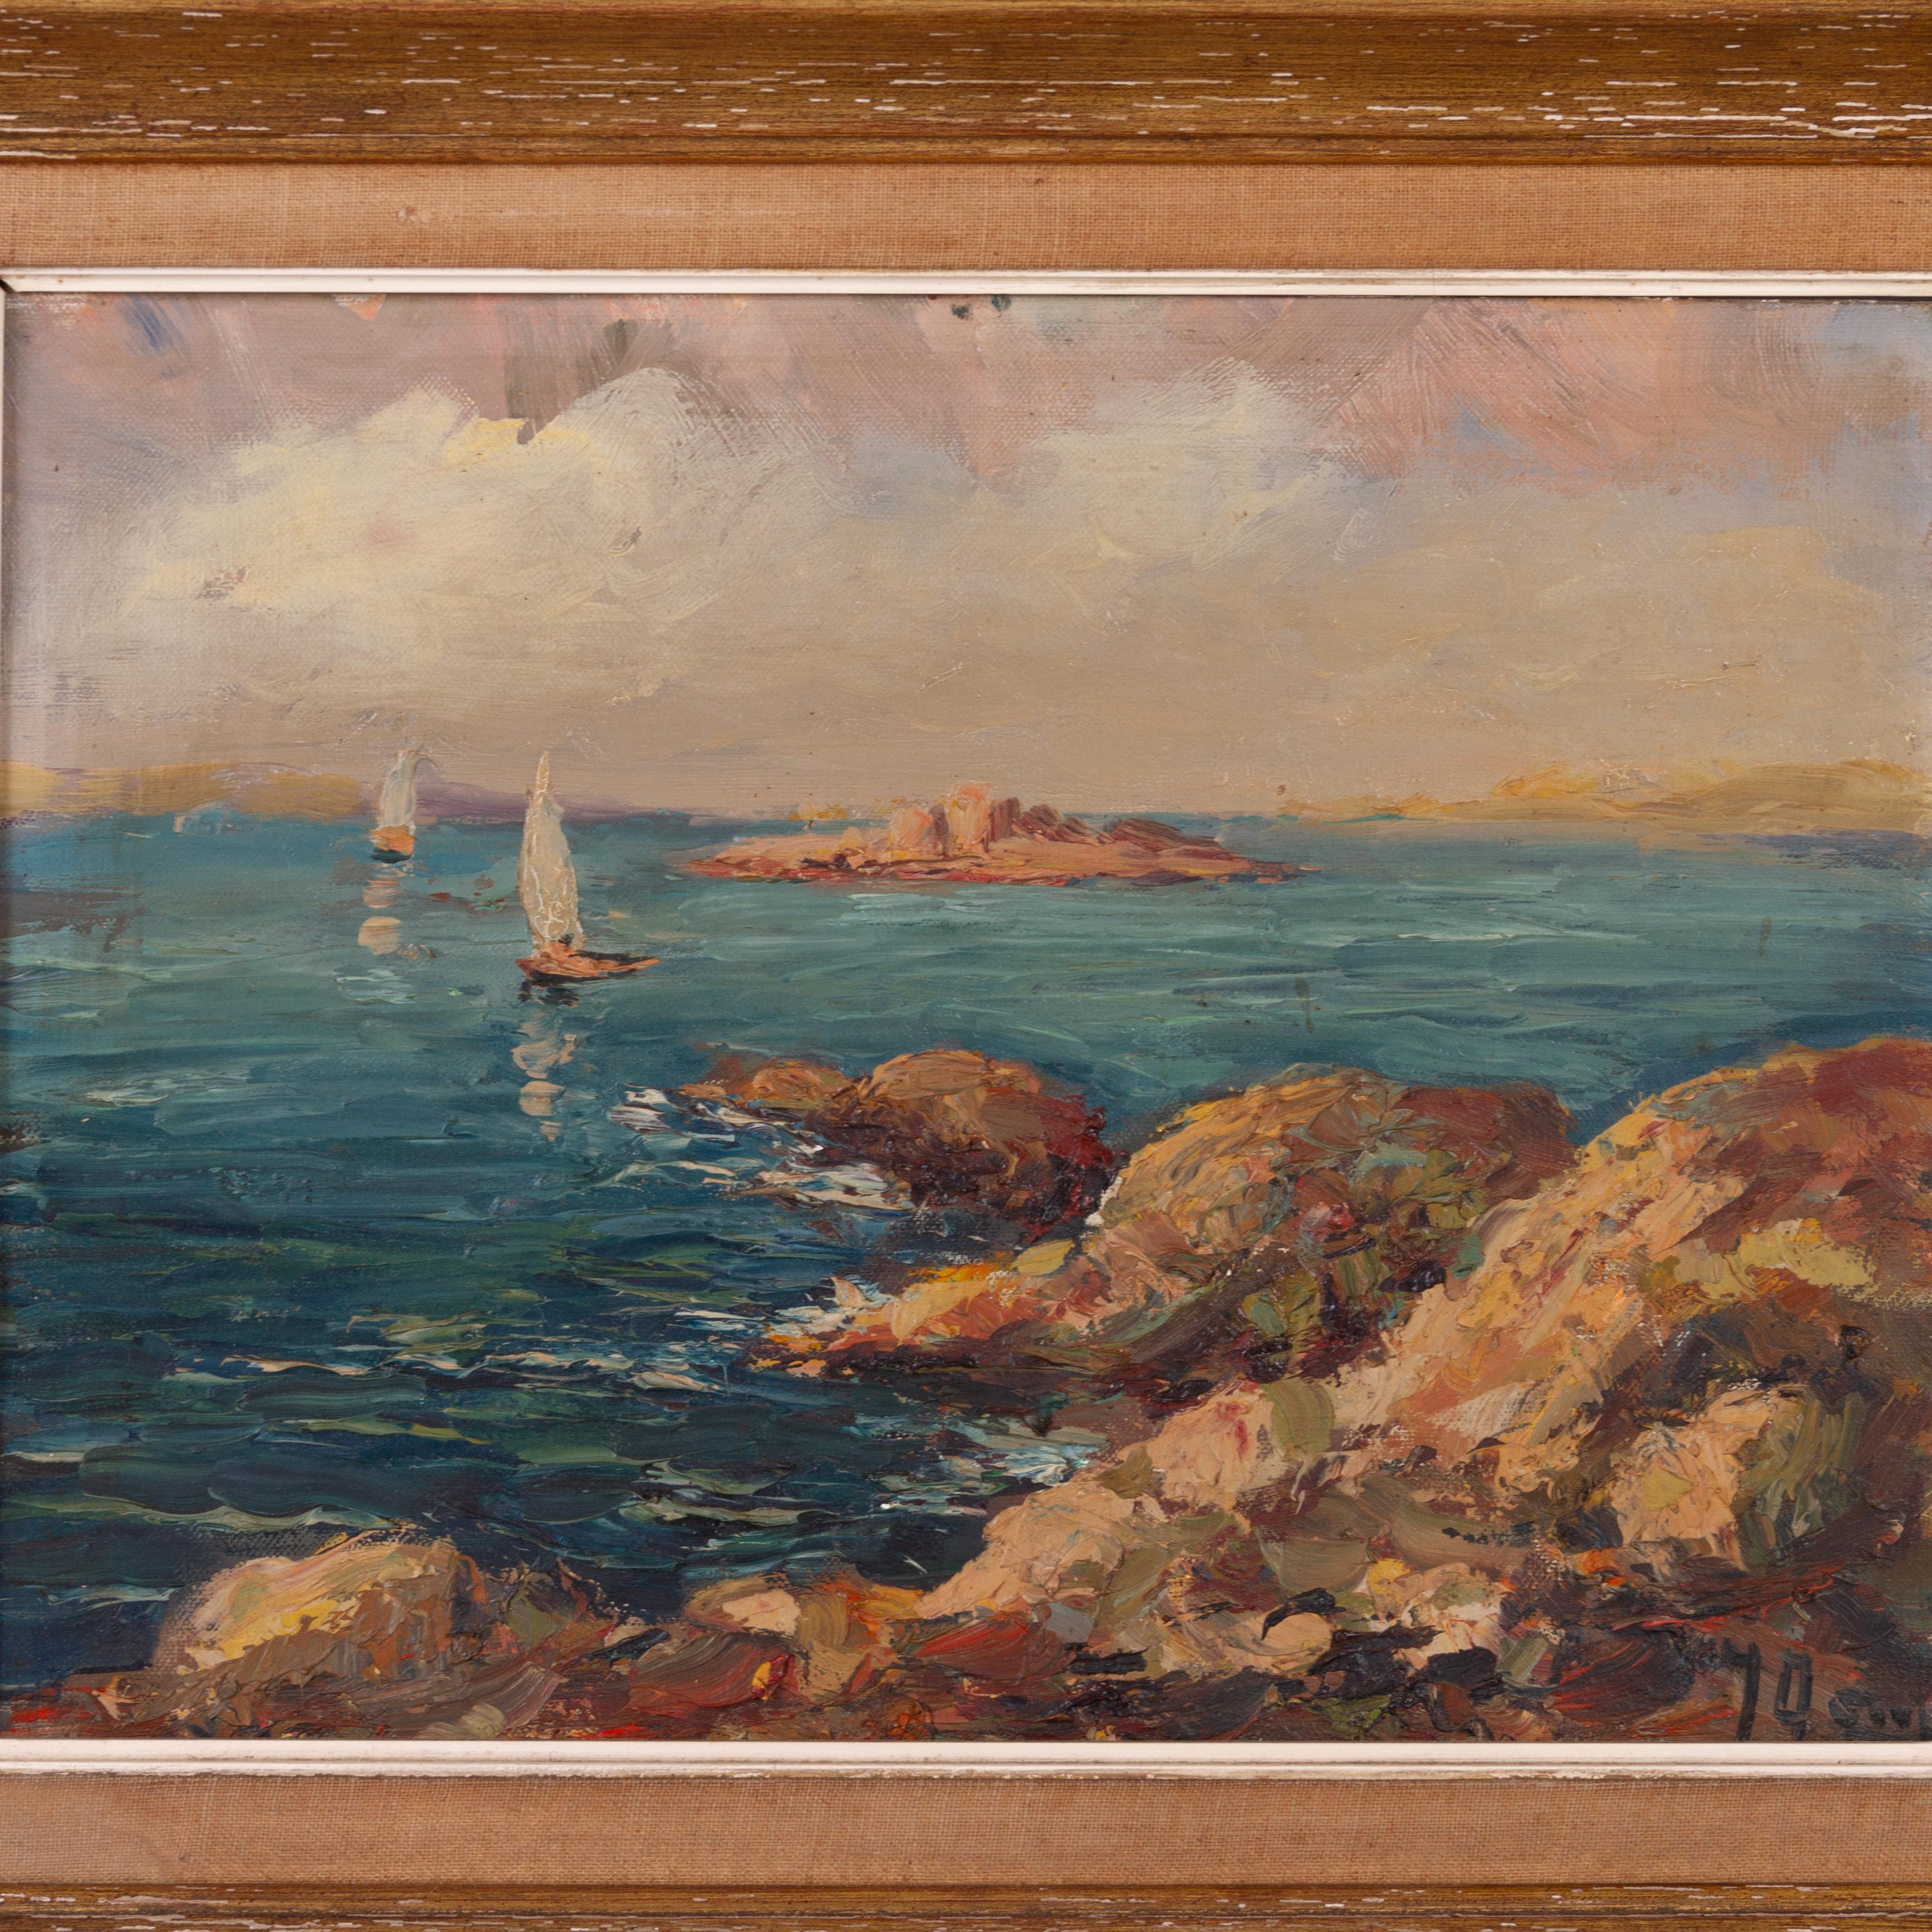 In good condition
From a private collection
Free international shipping
Signed Mediterranean Coastal Boating Scene Oil Painting 
